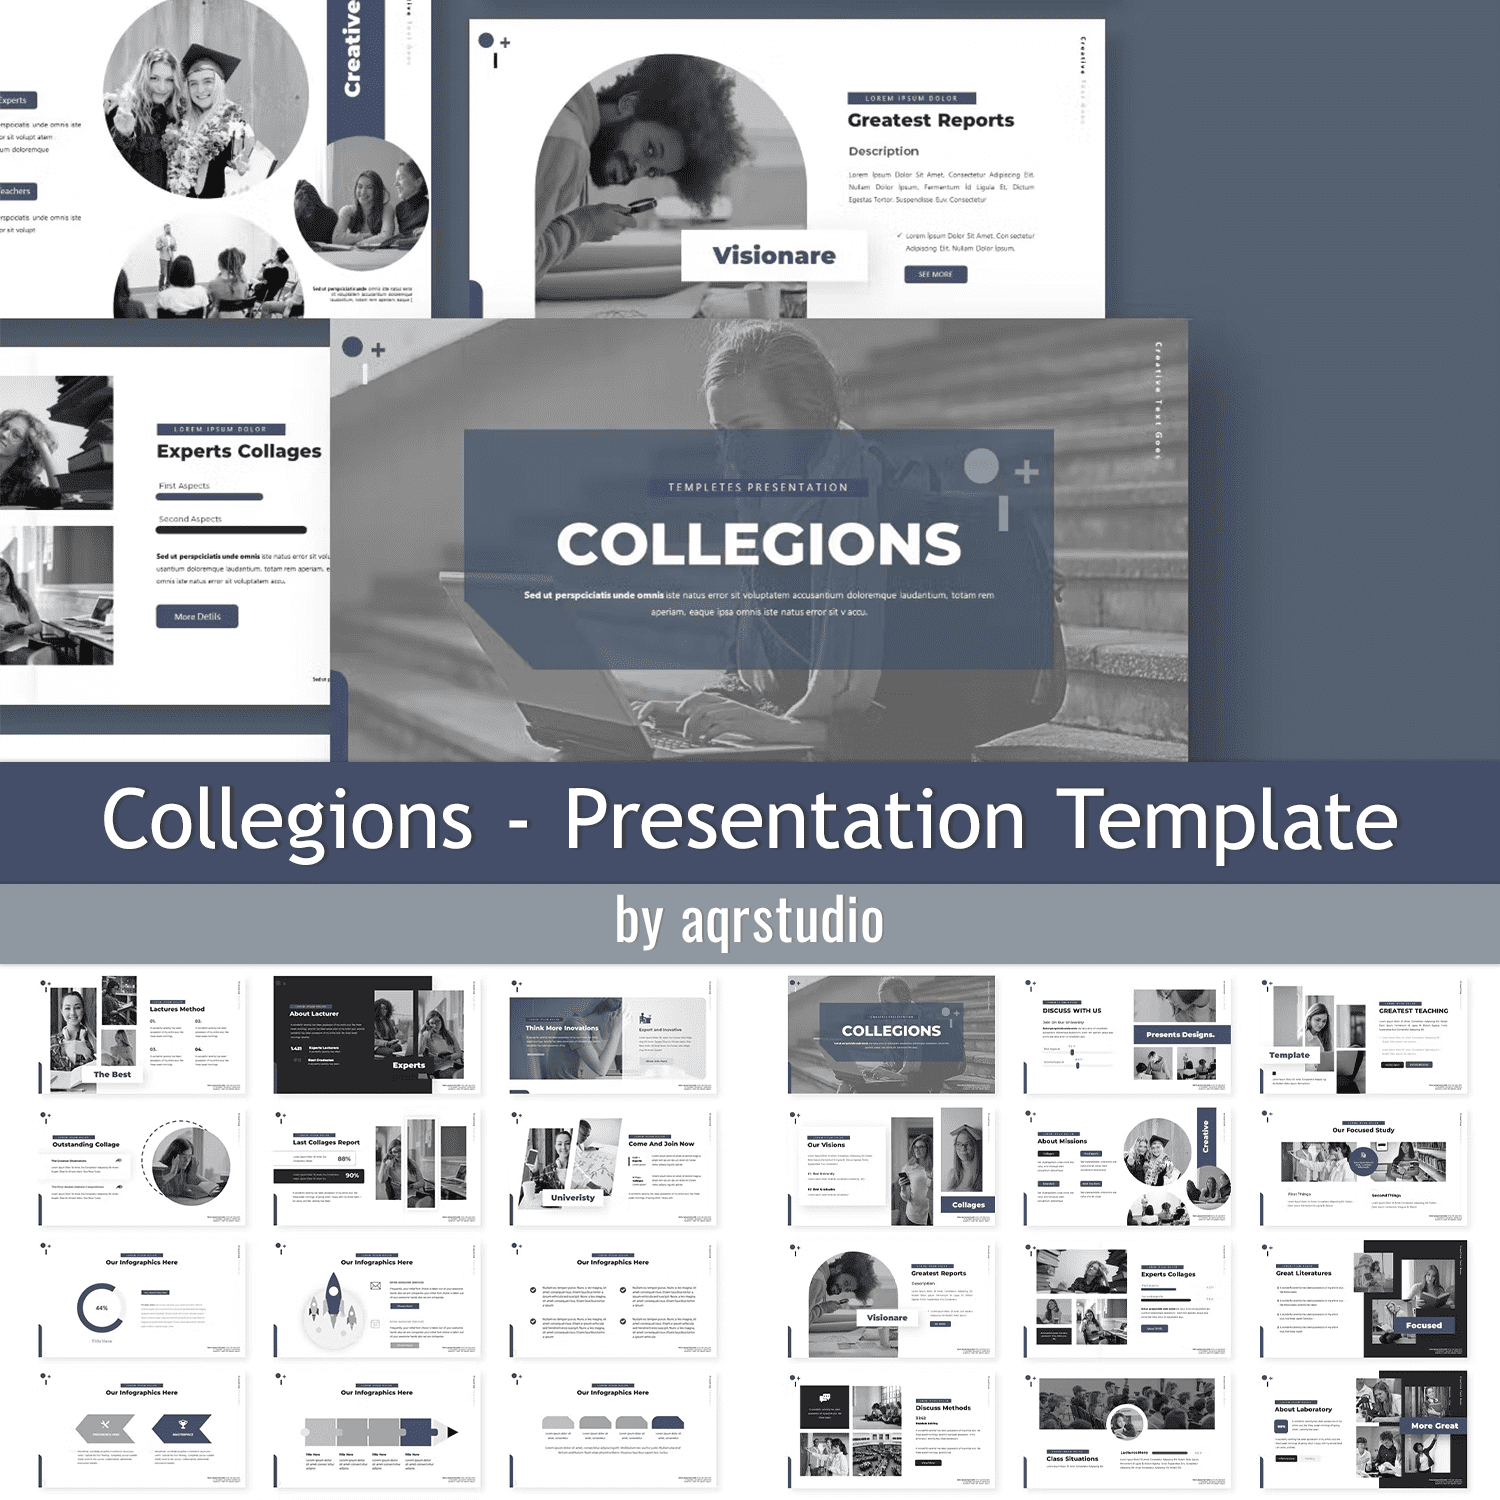 Collegions Presentation Template - main image preview.